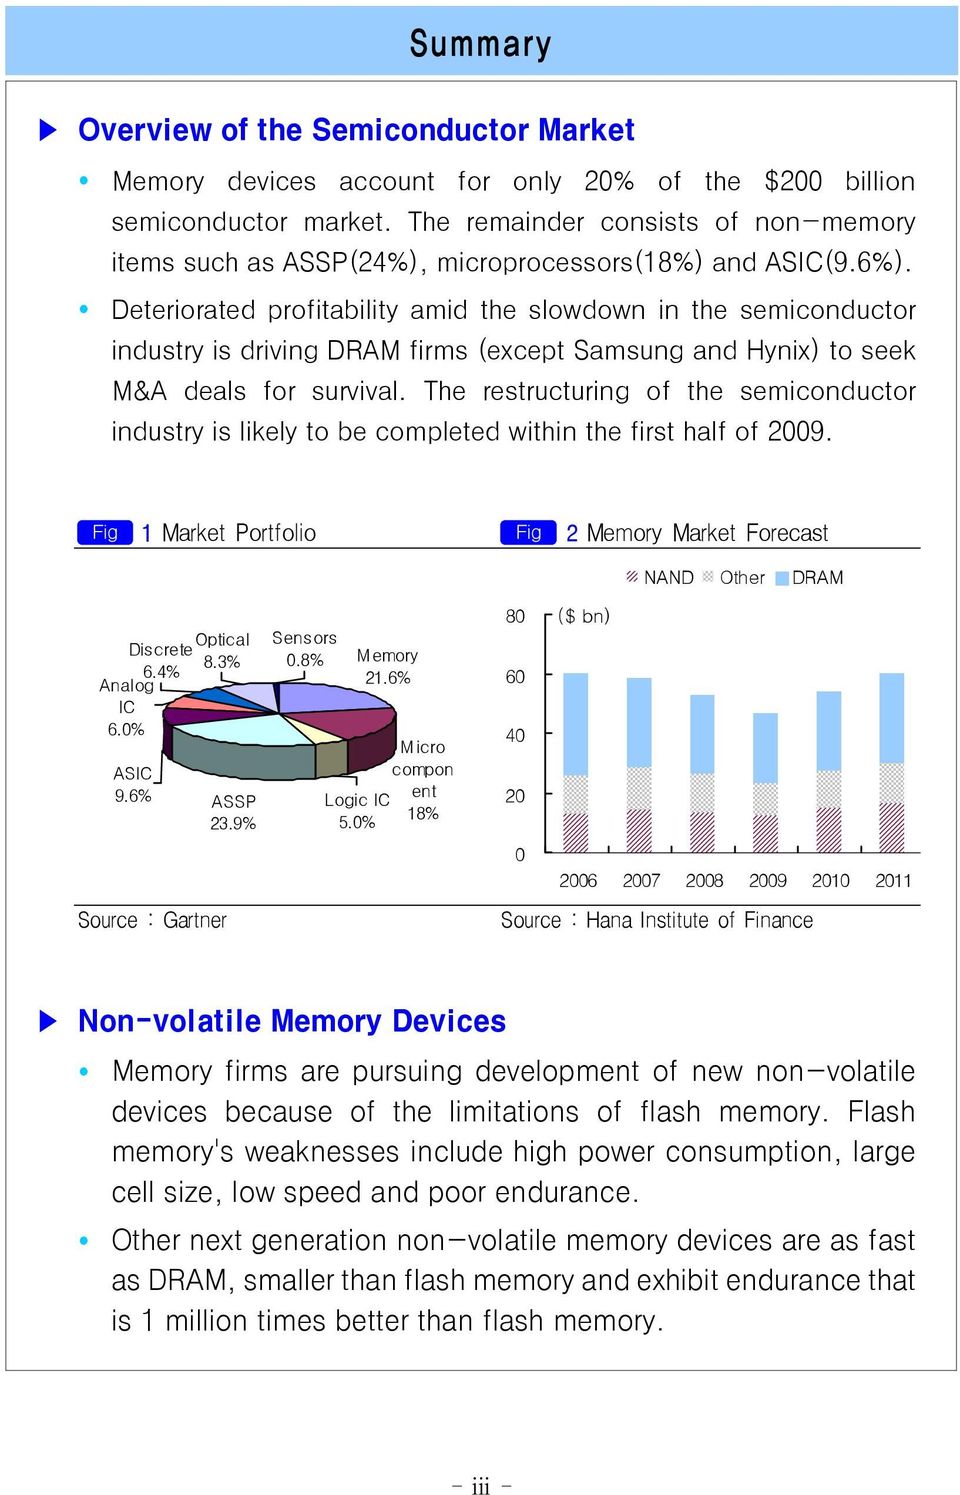 Deteriorated profitability amid the slowdown in the semiconductor industry is driving DRAM firms (except Samsung and Hynix) to seek M&A deals for survival.